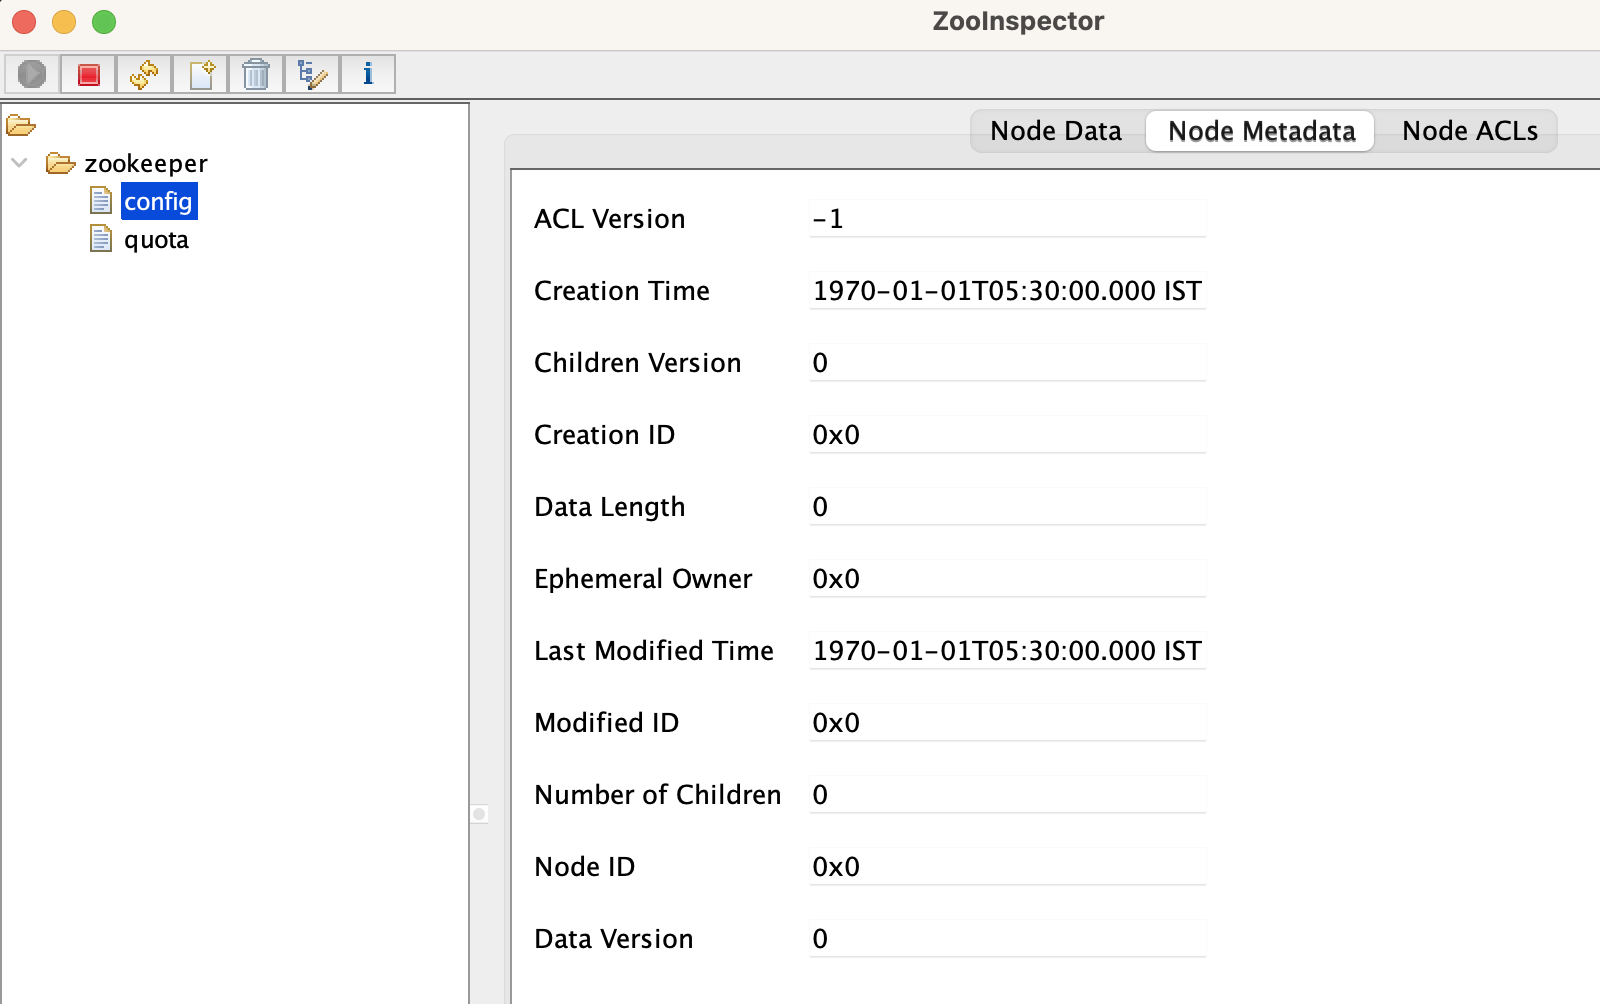 ZooInspector Tool: Shows ZooKeeper instance